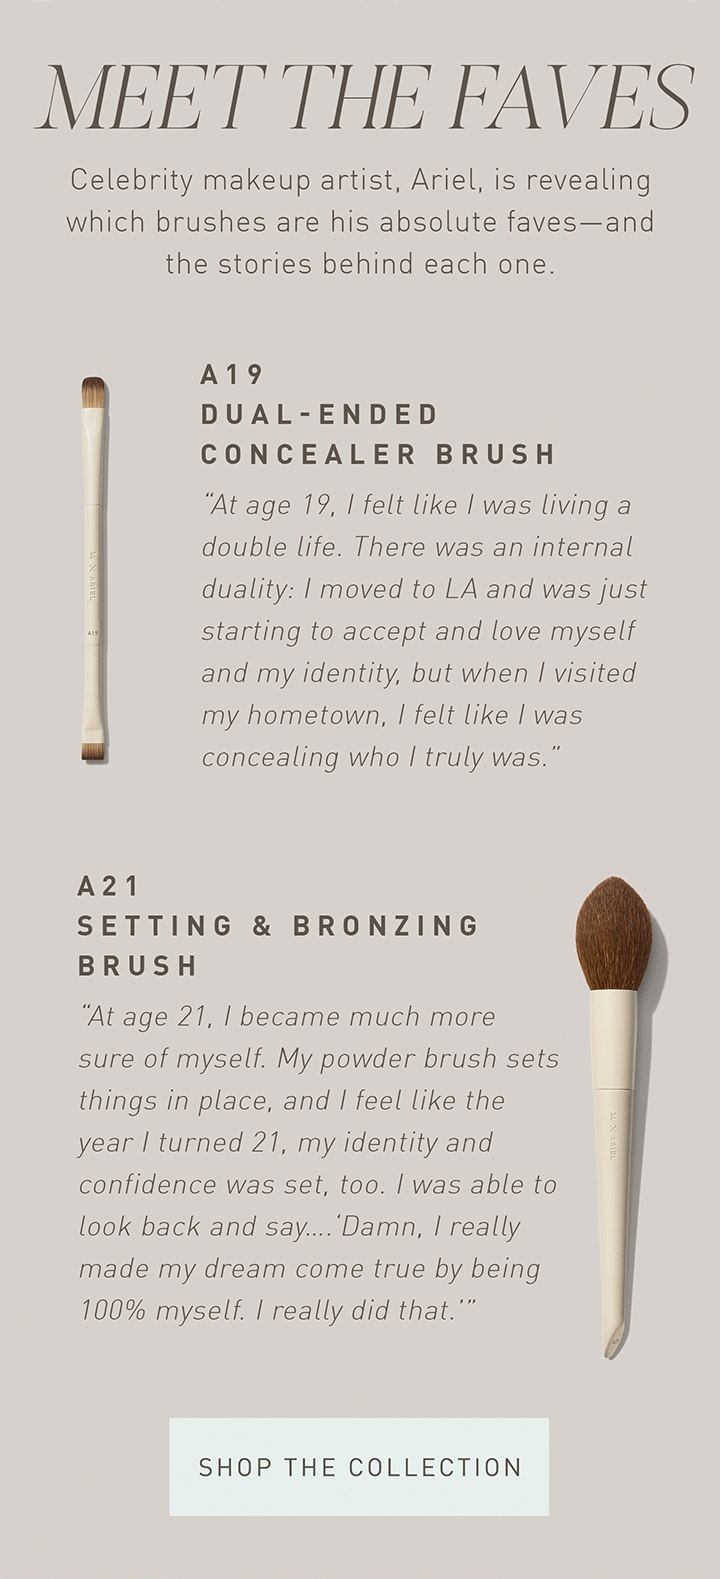 MEET THE FAVES Celebrity makeup artist, Ariel, is revealing which brushes are his absolute faves—and the stories behind each one. A19 Dual-Ended Concealer Brush “At age 19, I felt like I was living a double life. There was an internal duality: I moved to LA and was just starting to accept and love myself and my identity, but when I visited my hometown, I felt like I was concealing who I truly was.” A21 Setting & Bronzing Brush “At age 21, I became much more sure of myself. My powder brush sets things in place, and I feel like the year I turned 21, my identity and confidence was set, too. I was able to look back and say….‘Damn, I really made my dream come true by being 100% myself. I really did that.’” SHOP THE COLLECTION